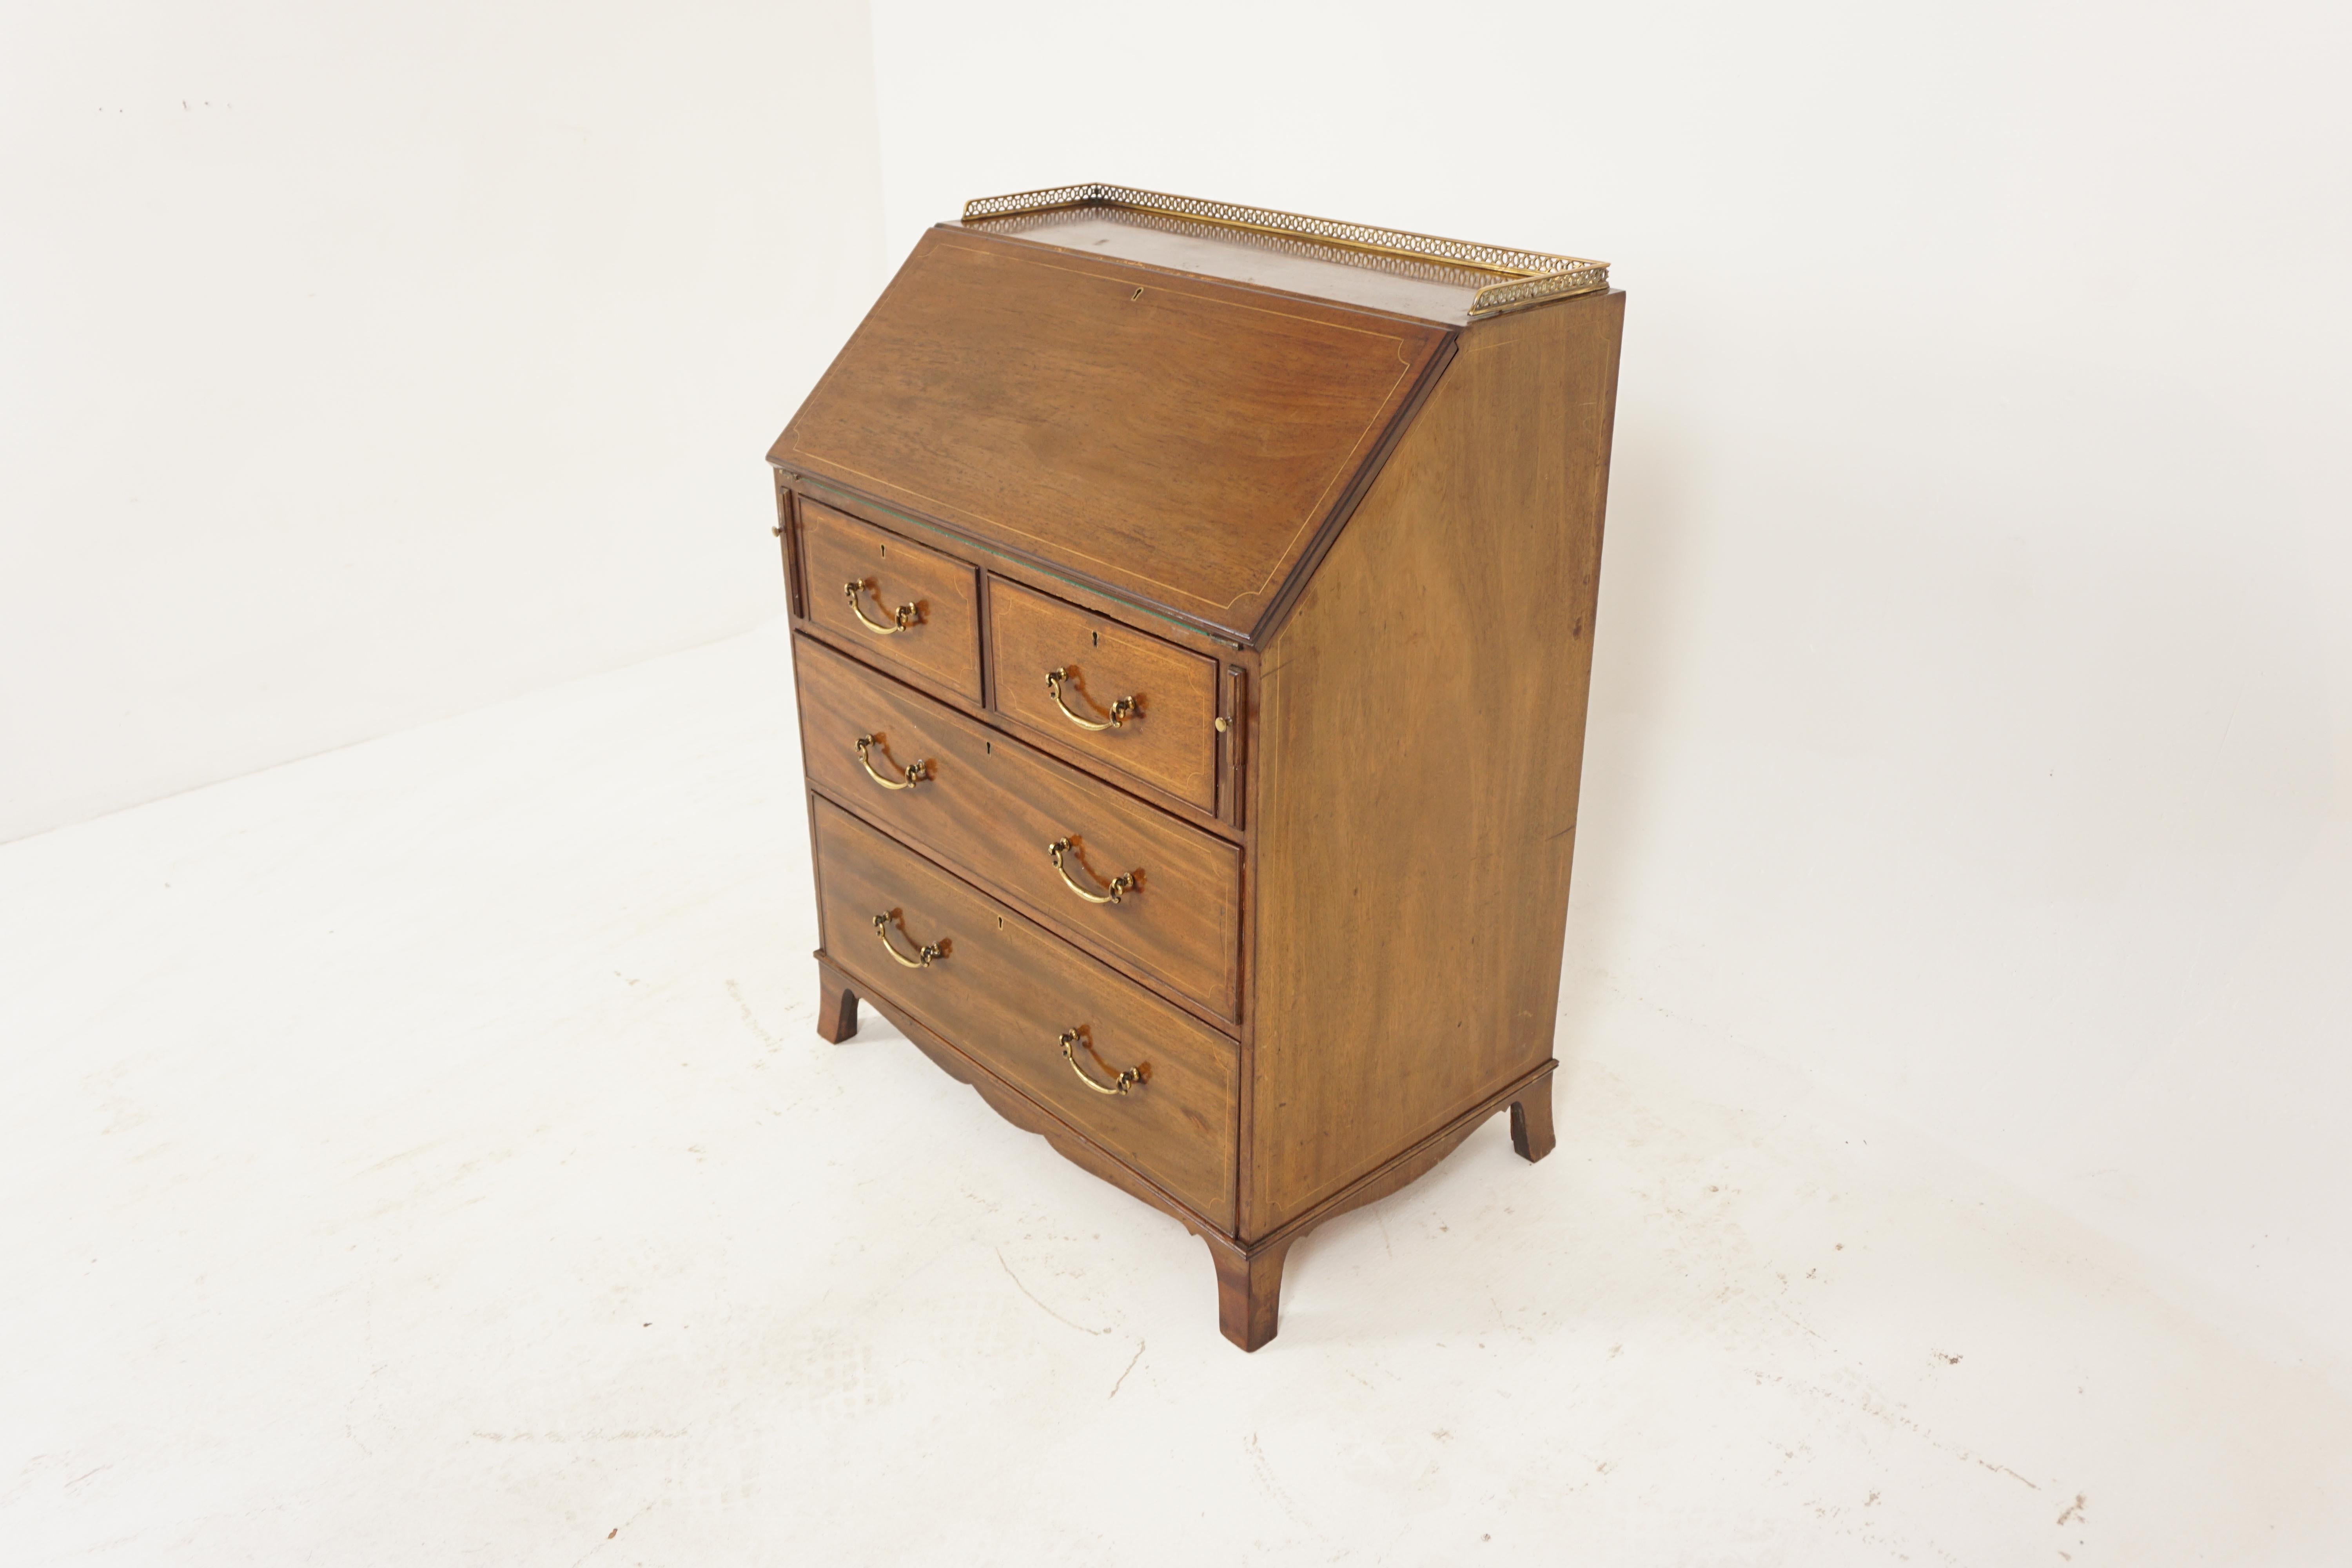 Antique Victorian Inlaid Slant front desk Bureau, Scotland 1900, H227

Scotland 1900
Solid walnut
Original finish
Three quarter brass gallery on top 
Inlaid fall front
Opens to reveal a fitted interior with three drawers and pigeon holes
Writing